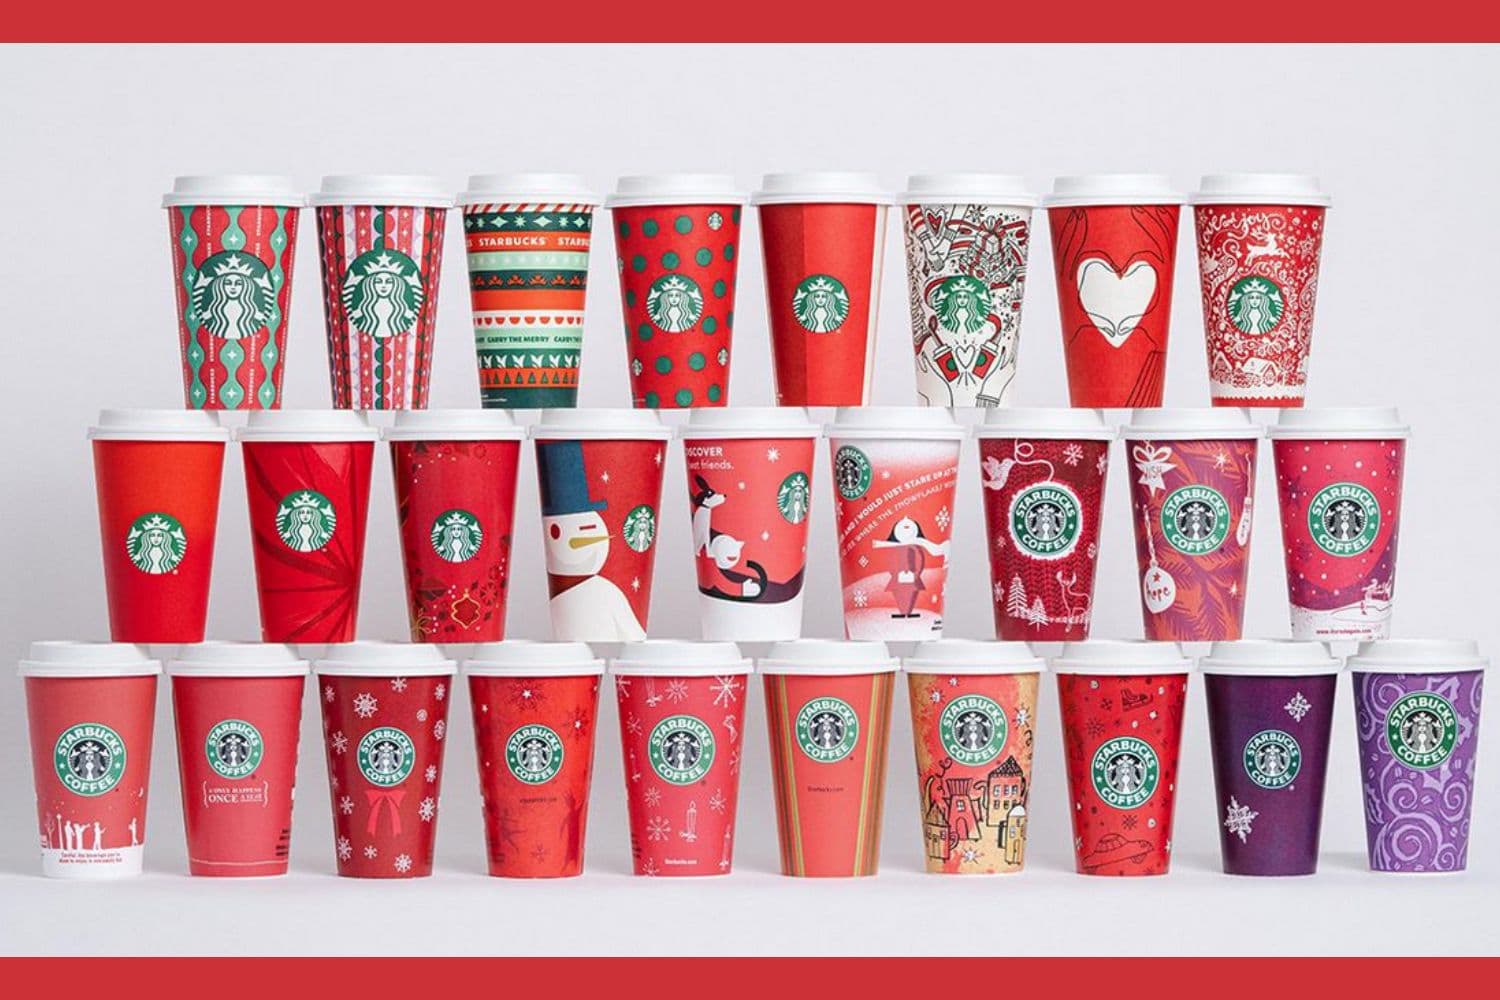 Aesthetic Starbucks cup  Coffee cup design, Starbucks cup art, Custom starbucks  cup